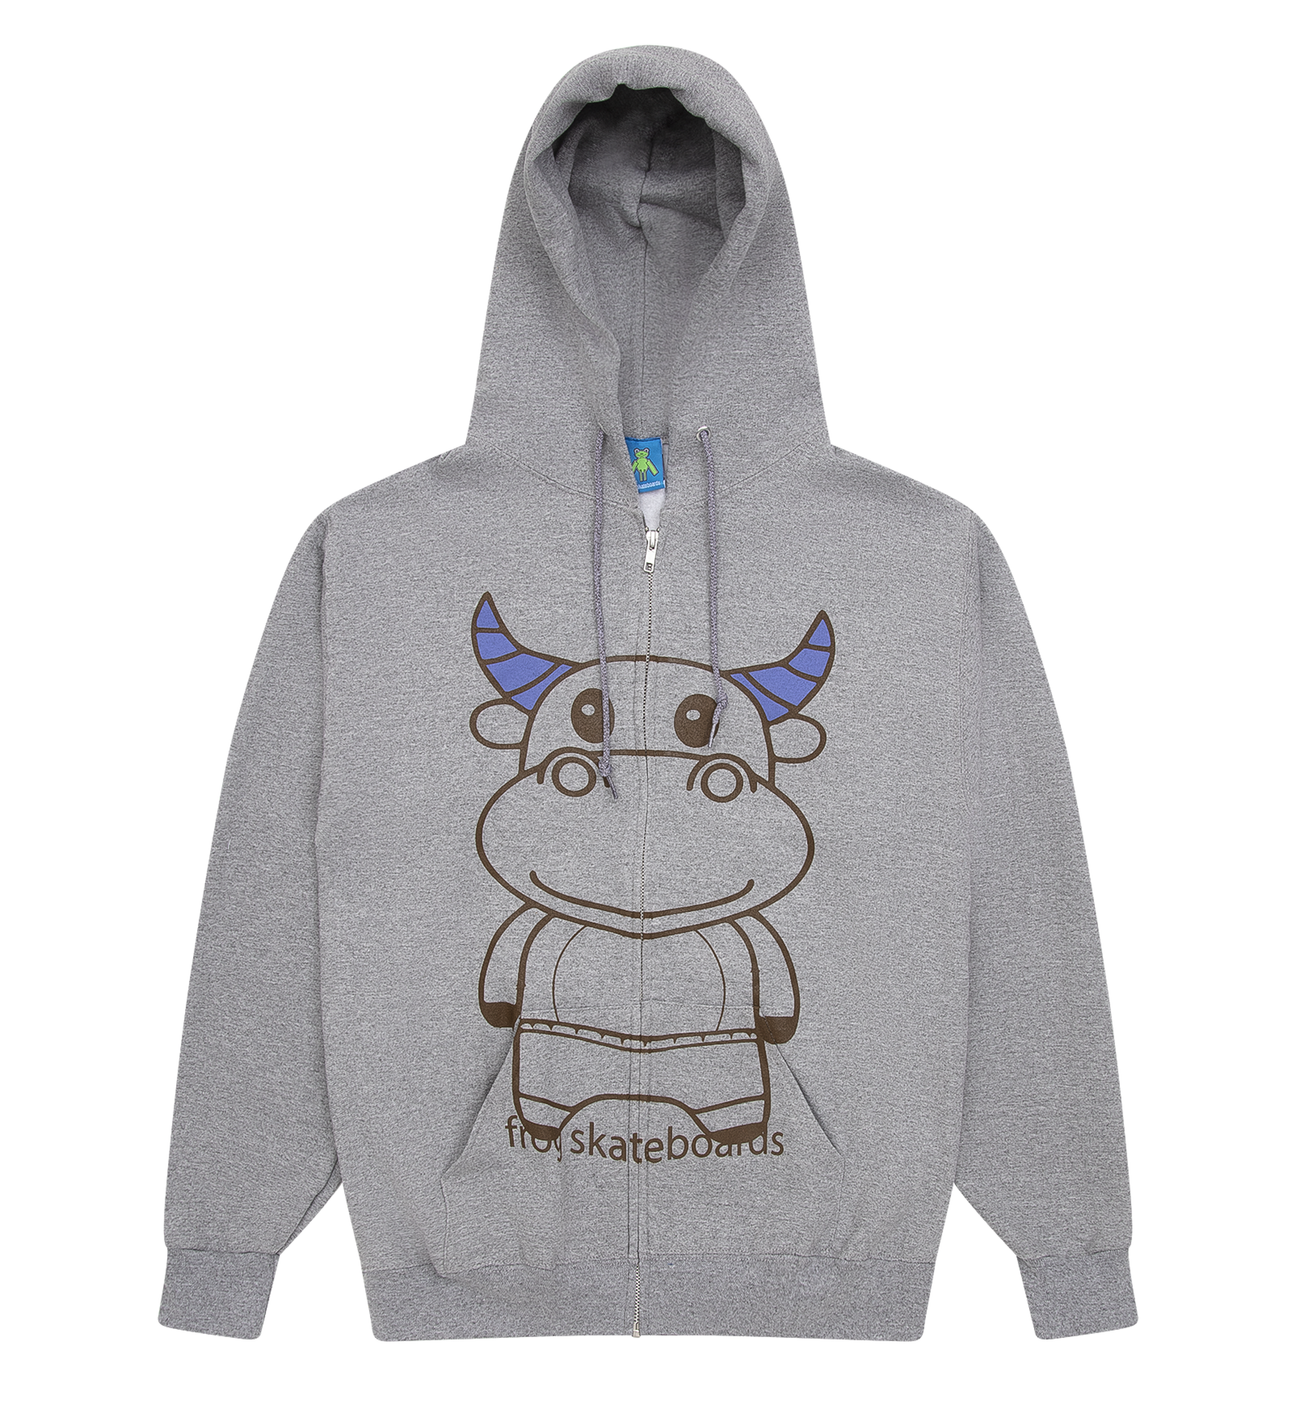 FROG SKATEBOARDS TOTALLY AWESOME ZIP HOODIE ASH GREY